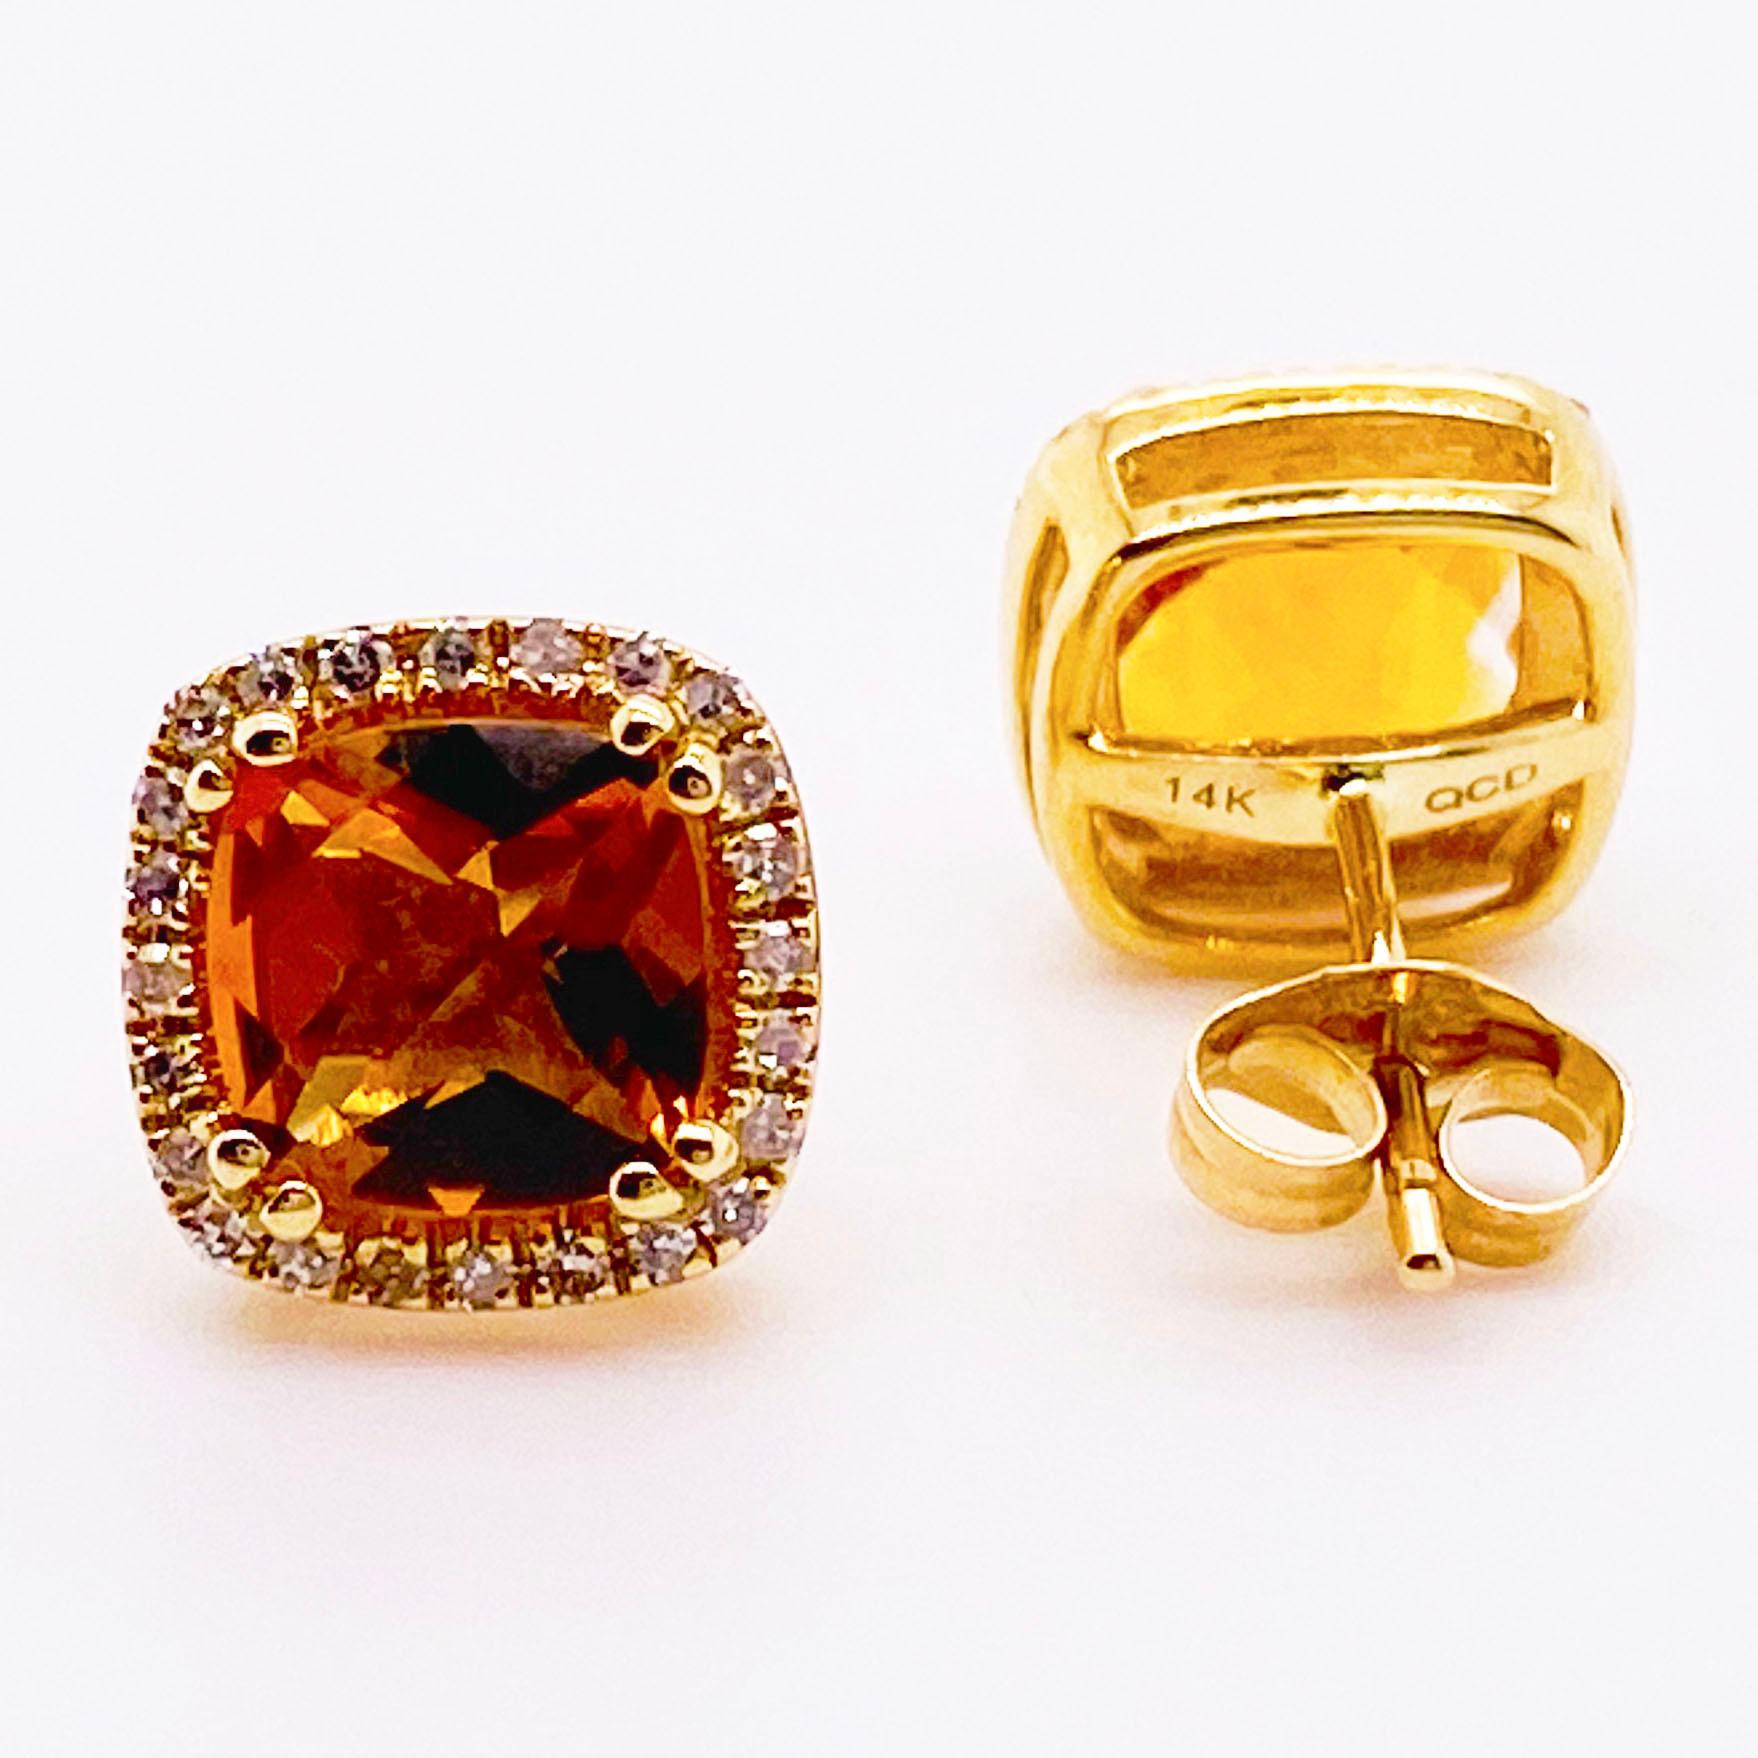 Classic orangish yellow citrine and diamond halo stud earrings, perfect for every occasion! The stunning citrine gemstone earrings have one cushion cut, genuine citrine gemstone set in a diamond halo frame in each earring. The citrines are a deep